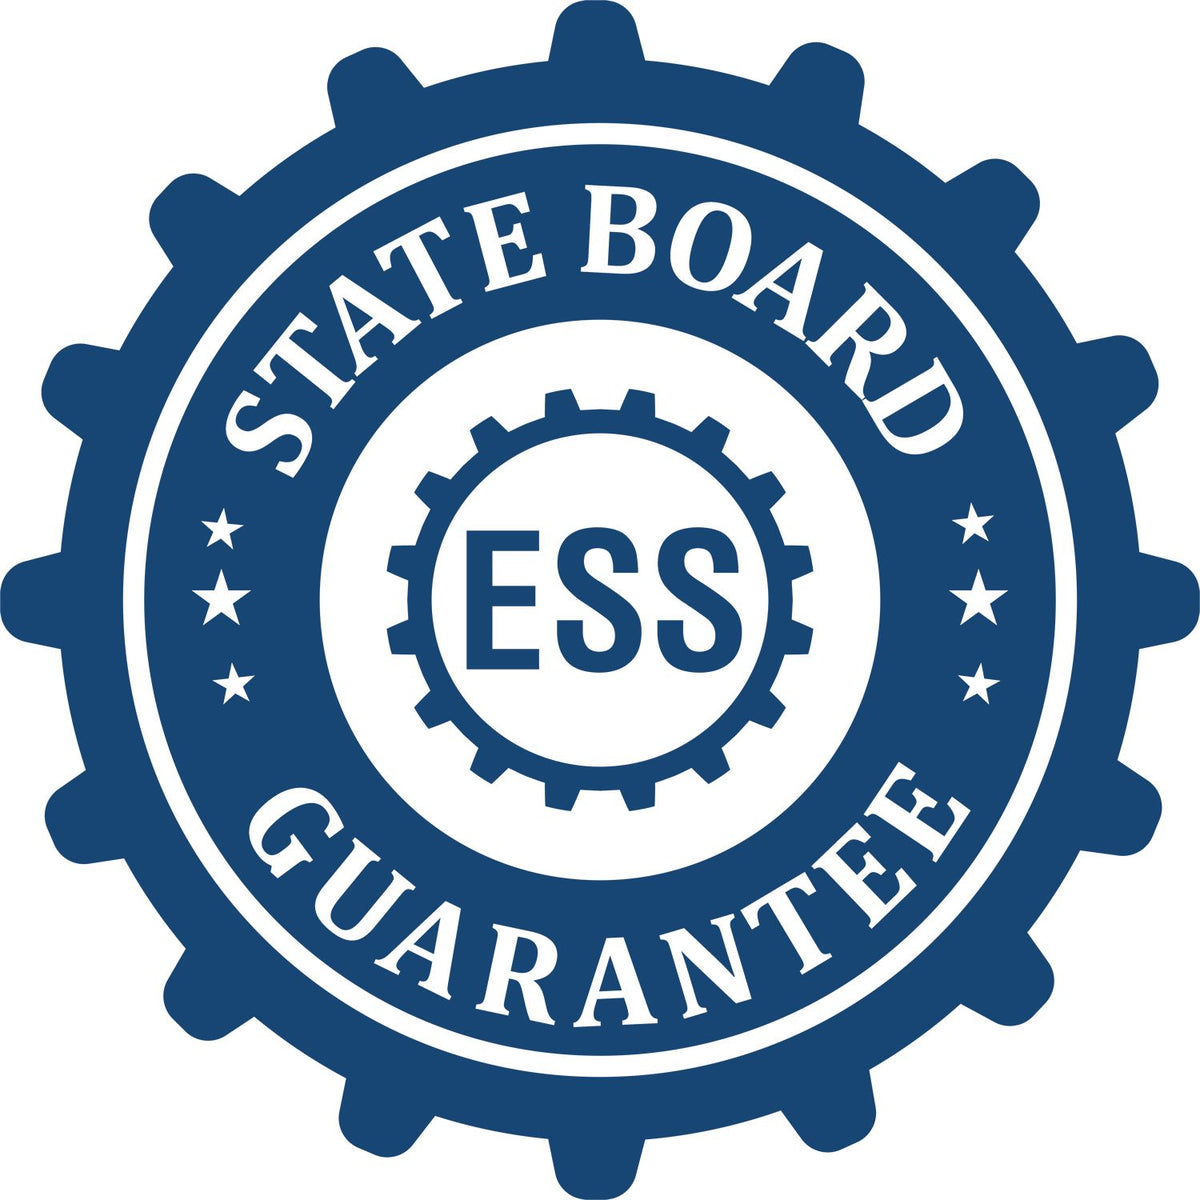 An emblem in a gear shape illustrating a state board guarantee for the Handheld Arizona Land Surveyor Seal product.